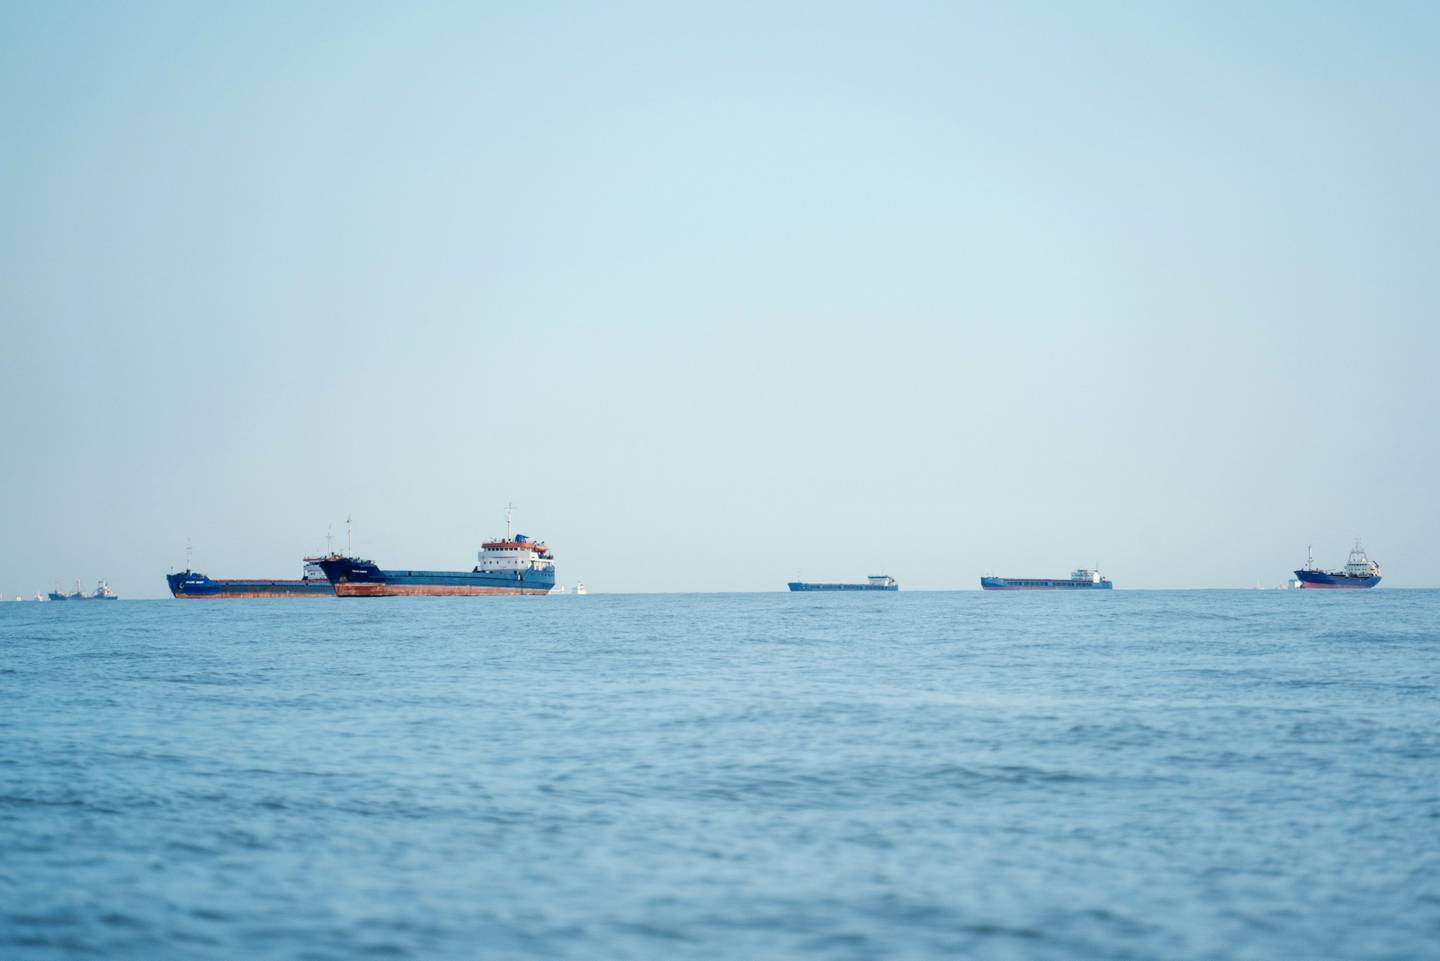 Cargo ships and bulk carriers in the Black Sea wait to enter Romania's Sulina Canal, a river channel that provides access to the Danube River. Bloomberg